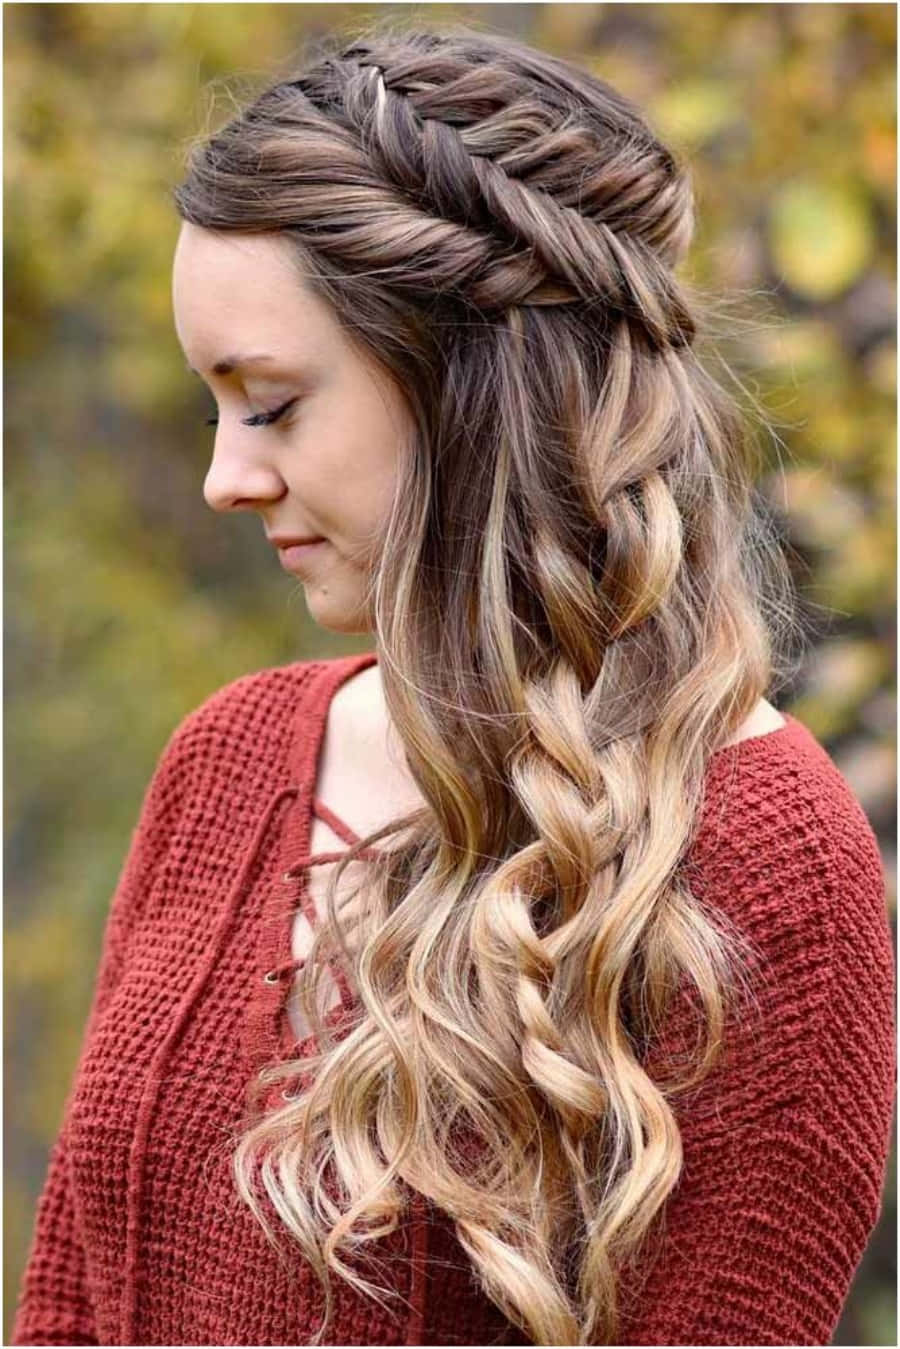 Caption: Girl Flaunting Her Cute Braid Hairstyle